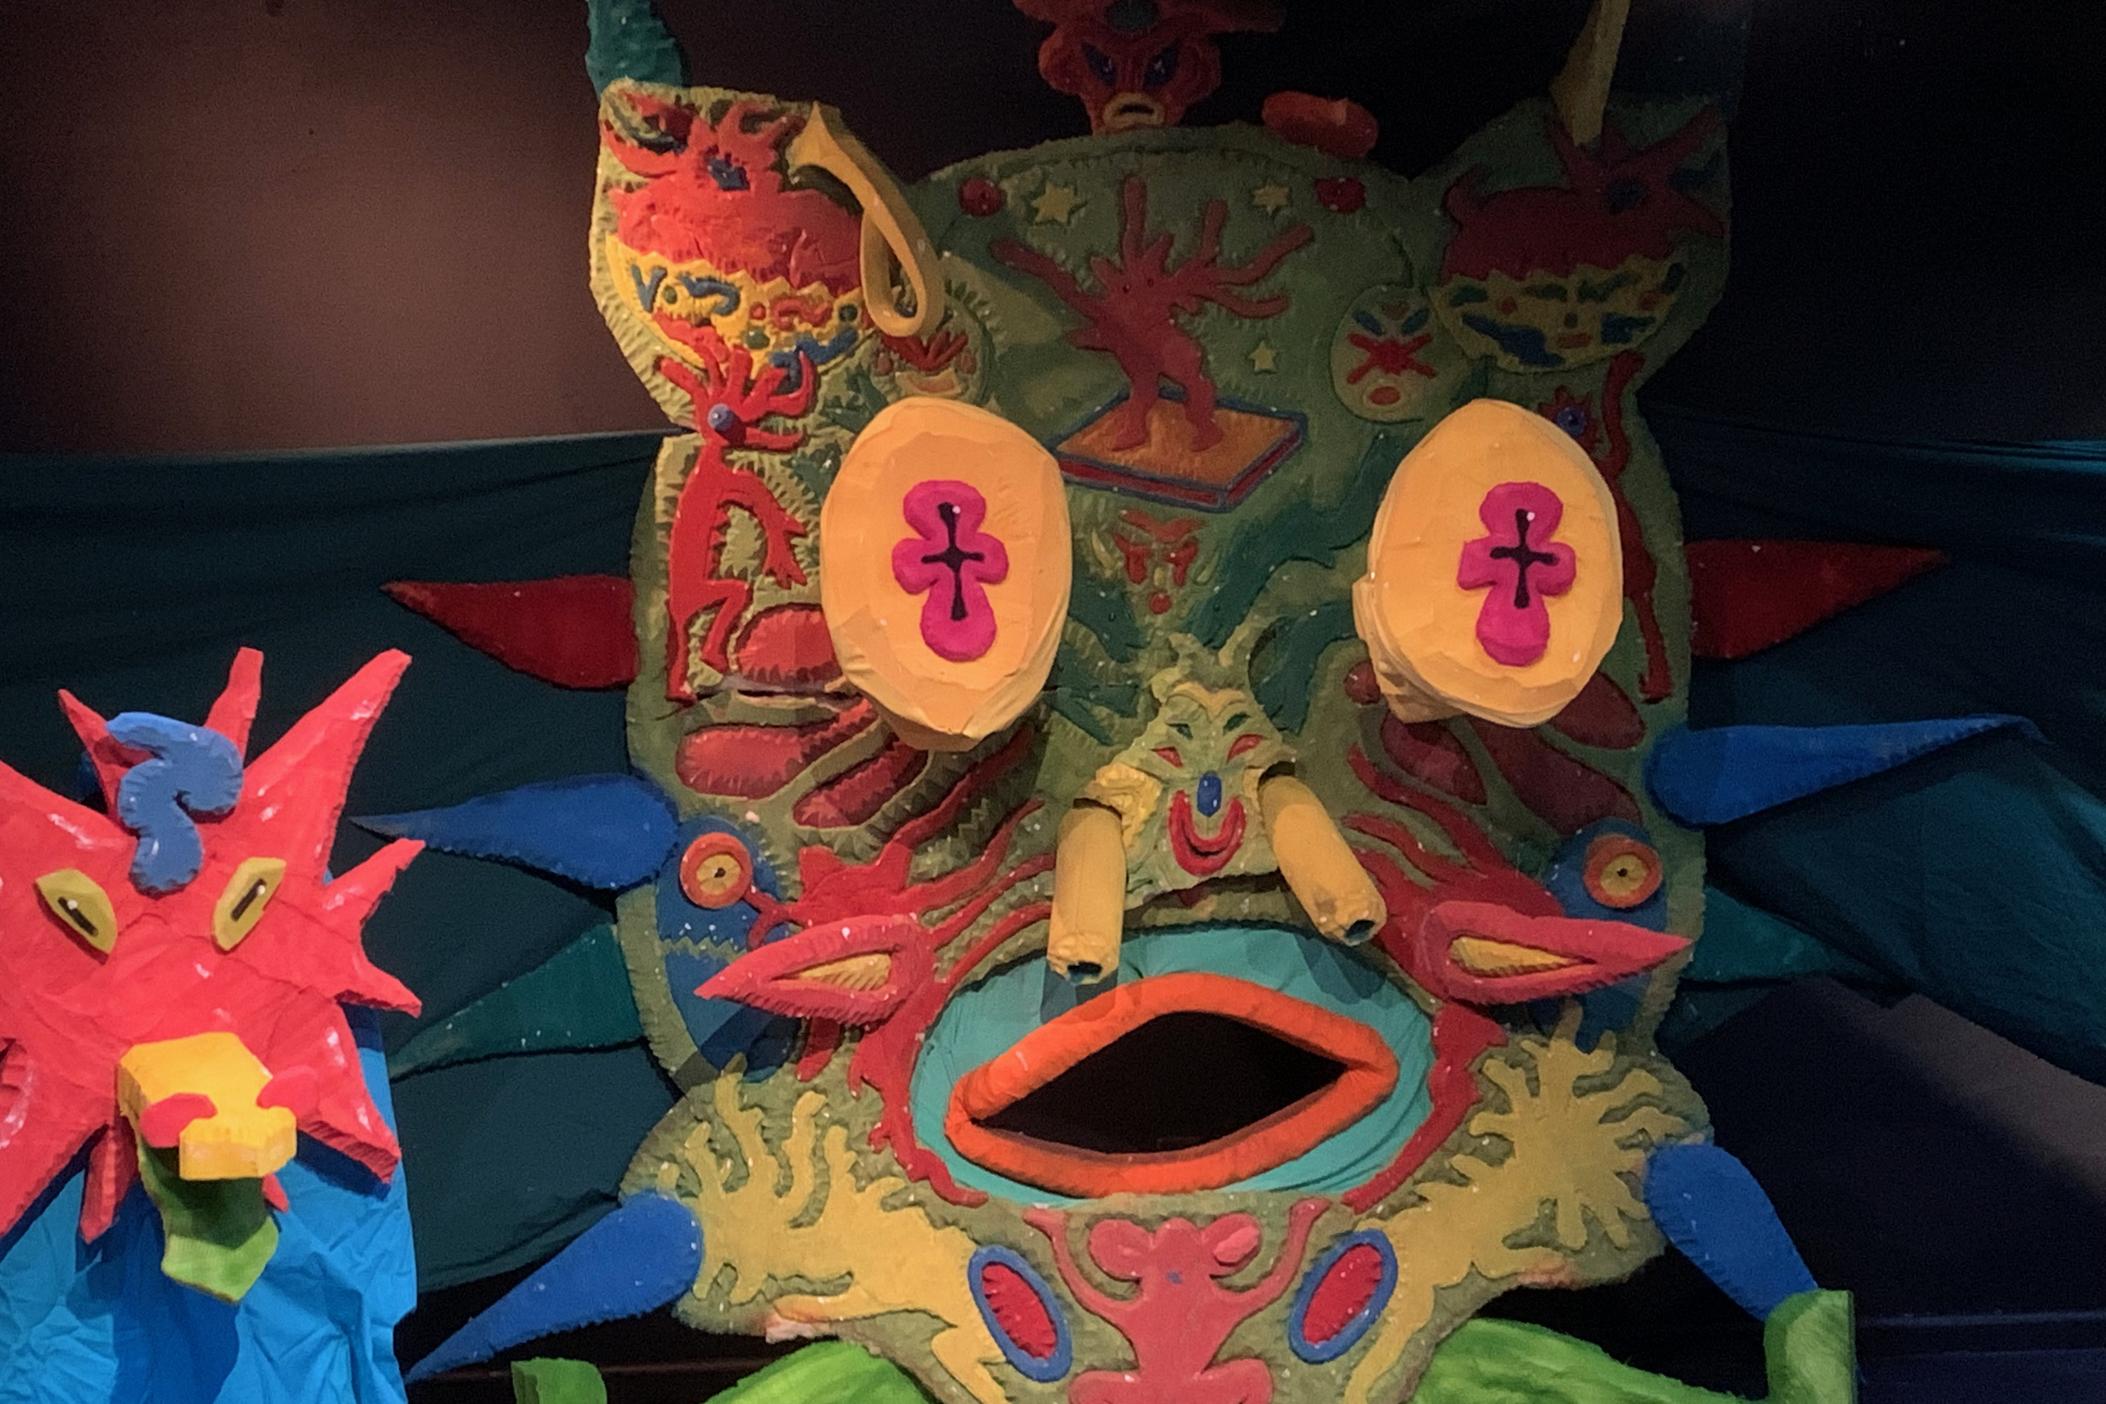 The main display from the Poncili Creación exhibit at the Center for Puppetry Arts Puppetry NOW initiative, which runs from July 6 to Oct. 29, 2023.